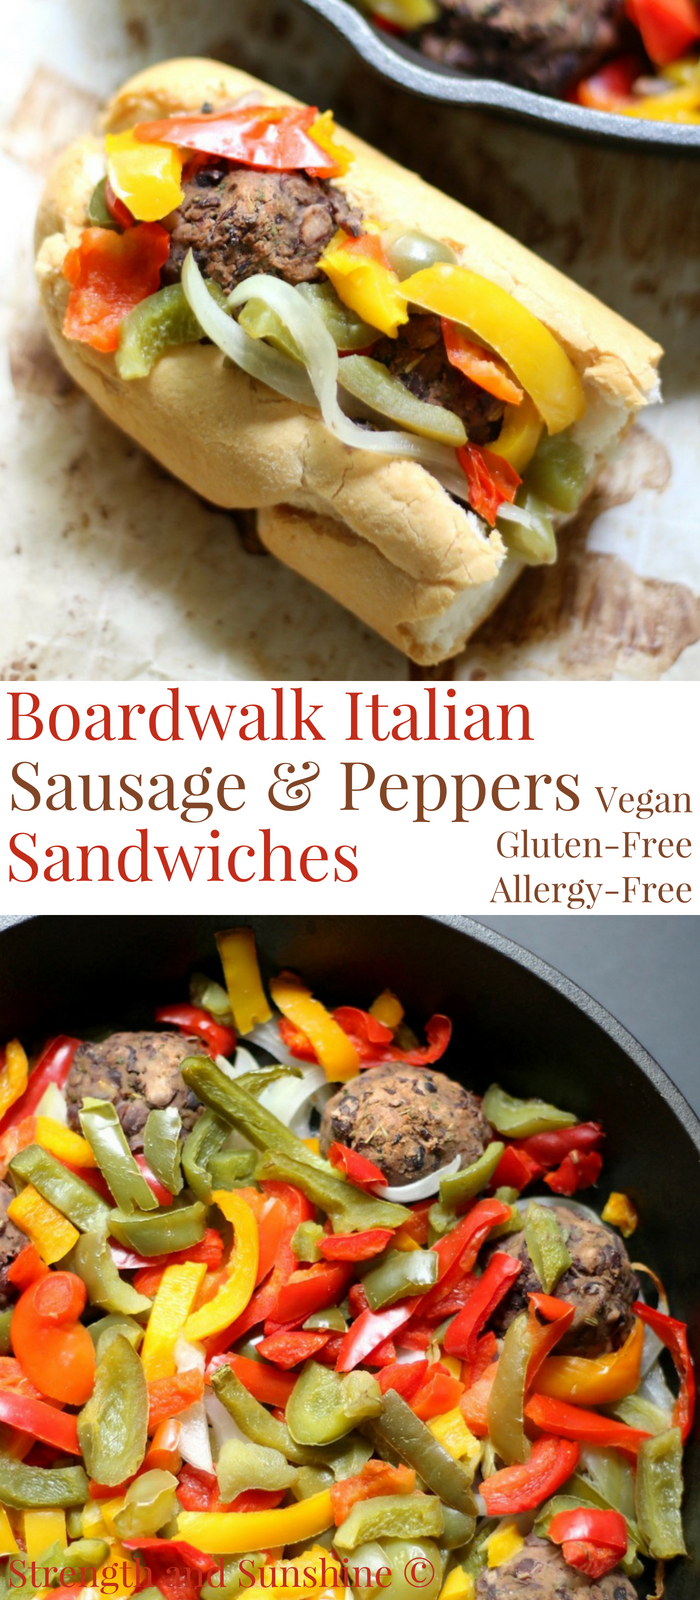 Vegan Boardwalk Italian Sausage & Peppers Sandwiches (Gluten-Free, Allergy-Free) | Strength and Sunshine @RebeccaGF666 A Jersey Shore classic! These meatless Boardwalk Italian Sausage & Peppers Sandwiches are vegan, gluten-free, and top 8 allergy-free! A simple, delicious, and healthy recipe for your greasy favorite summer comfort food! #sausageandpeppers #sandwich #glutenfree #vegan #strengthandsunshine